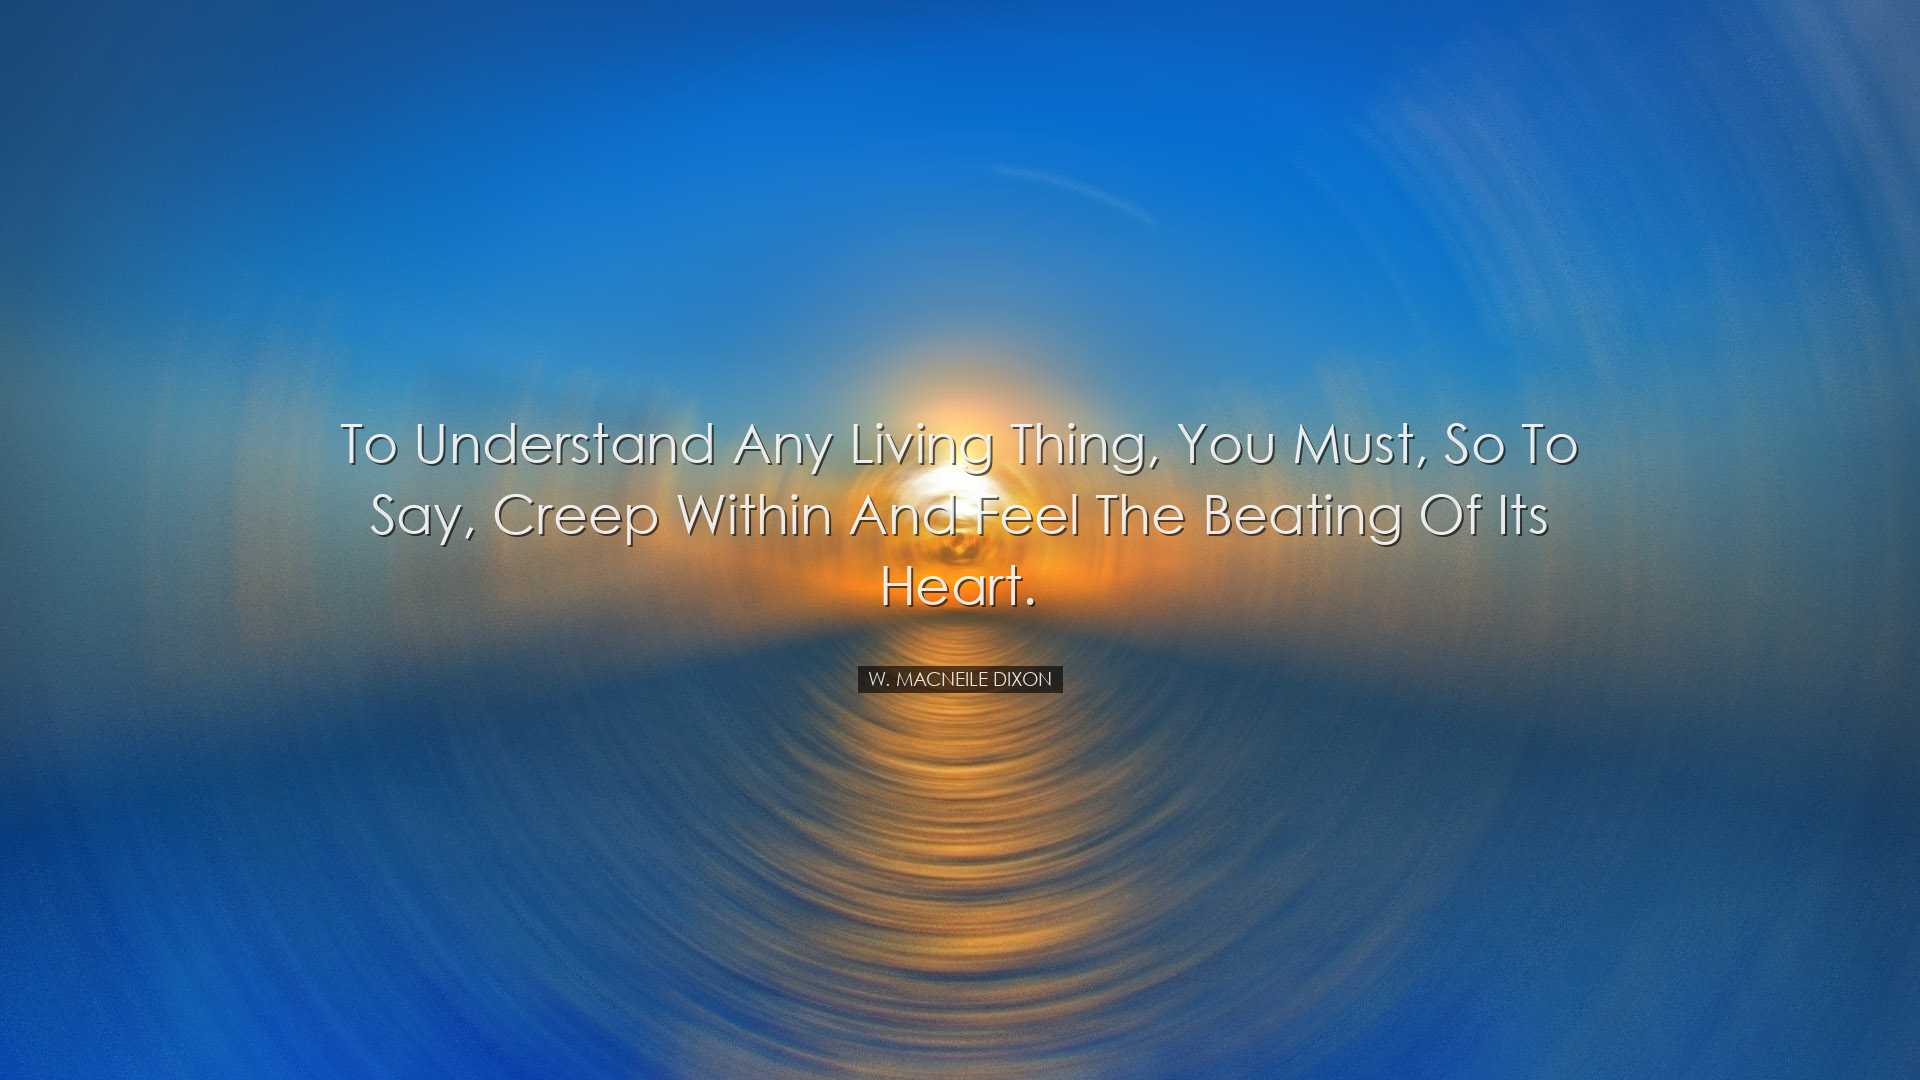 To understand any living thing, you must, so to say, creep within